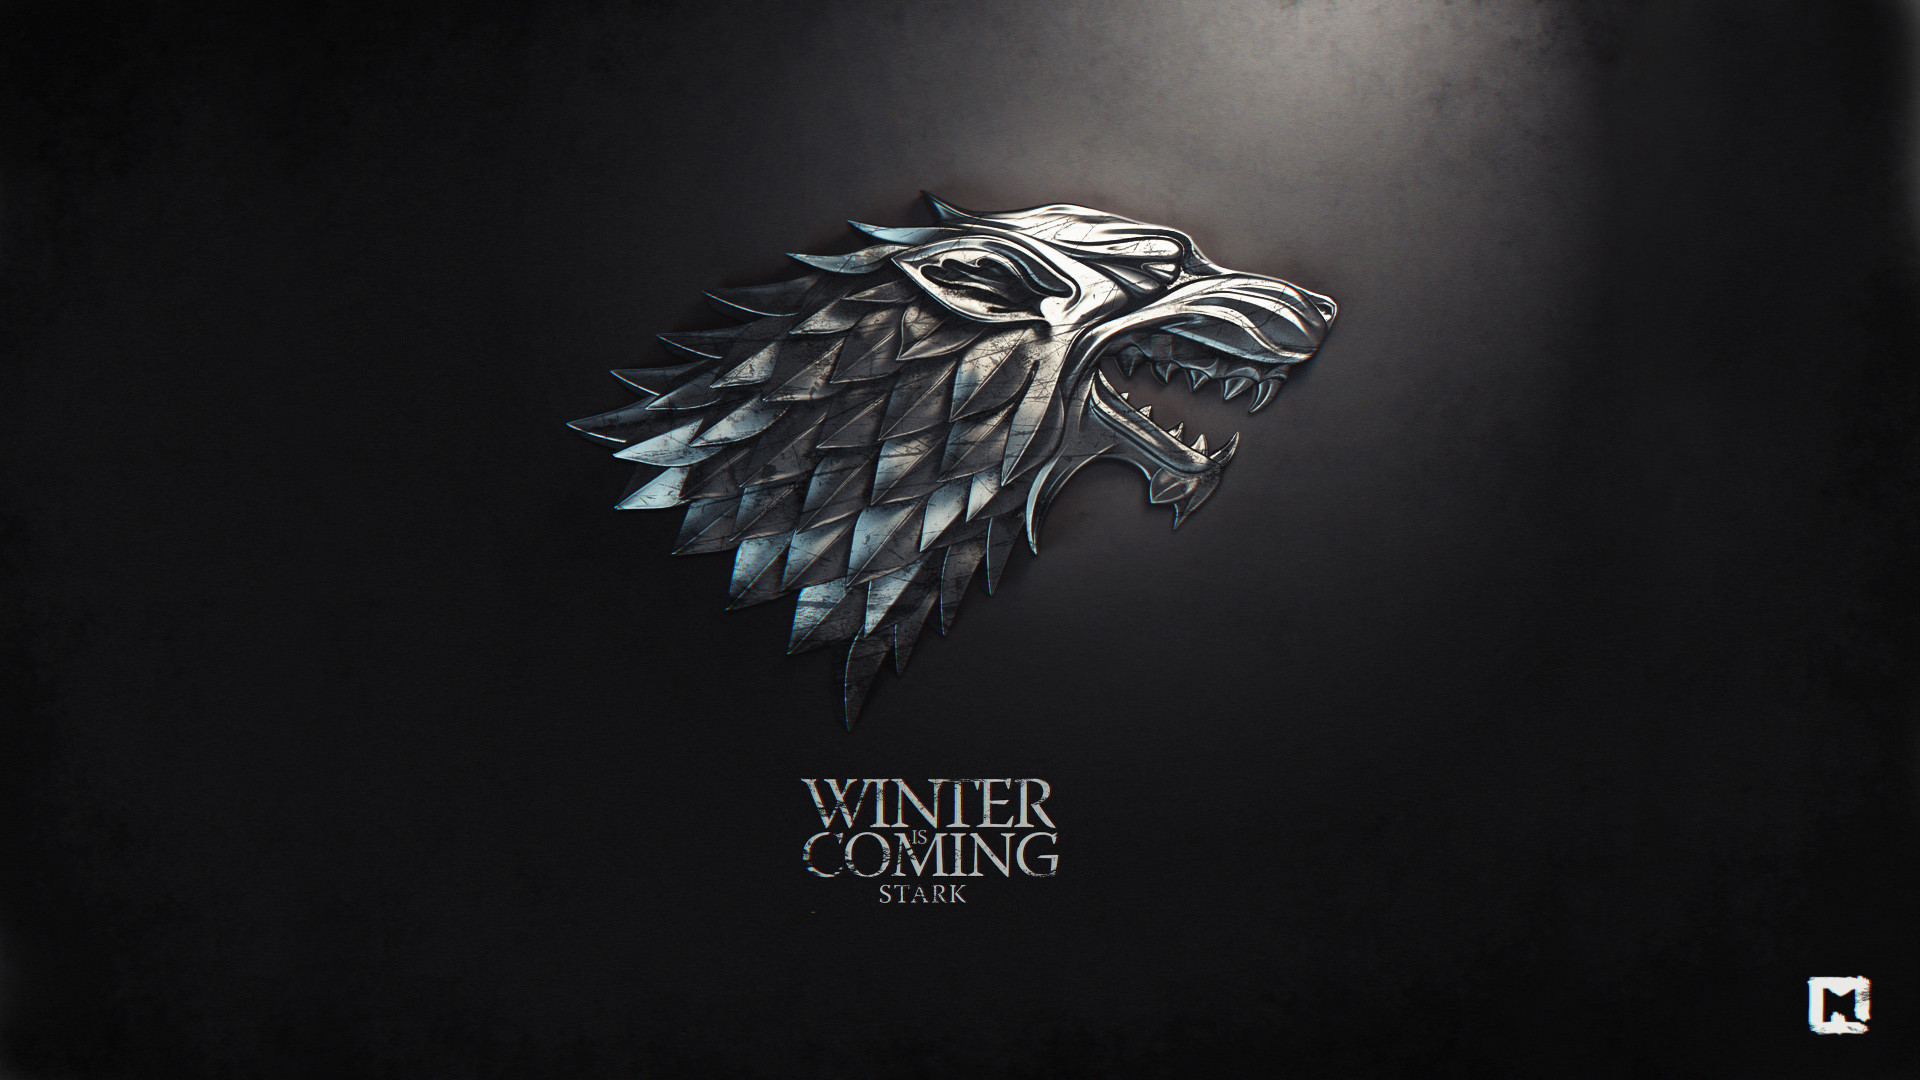 1920x1080 Game Of Thrones Wallpaper Hd (76 Wallpapers)